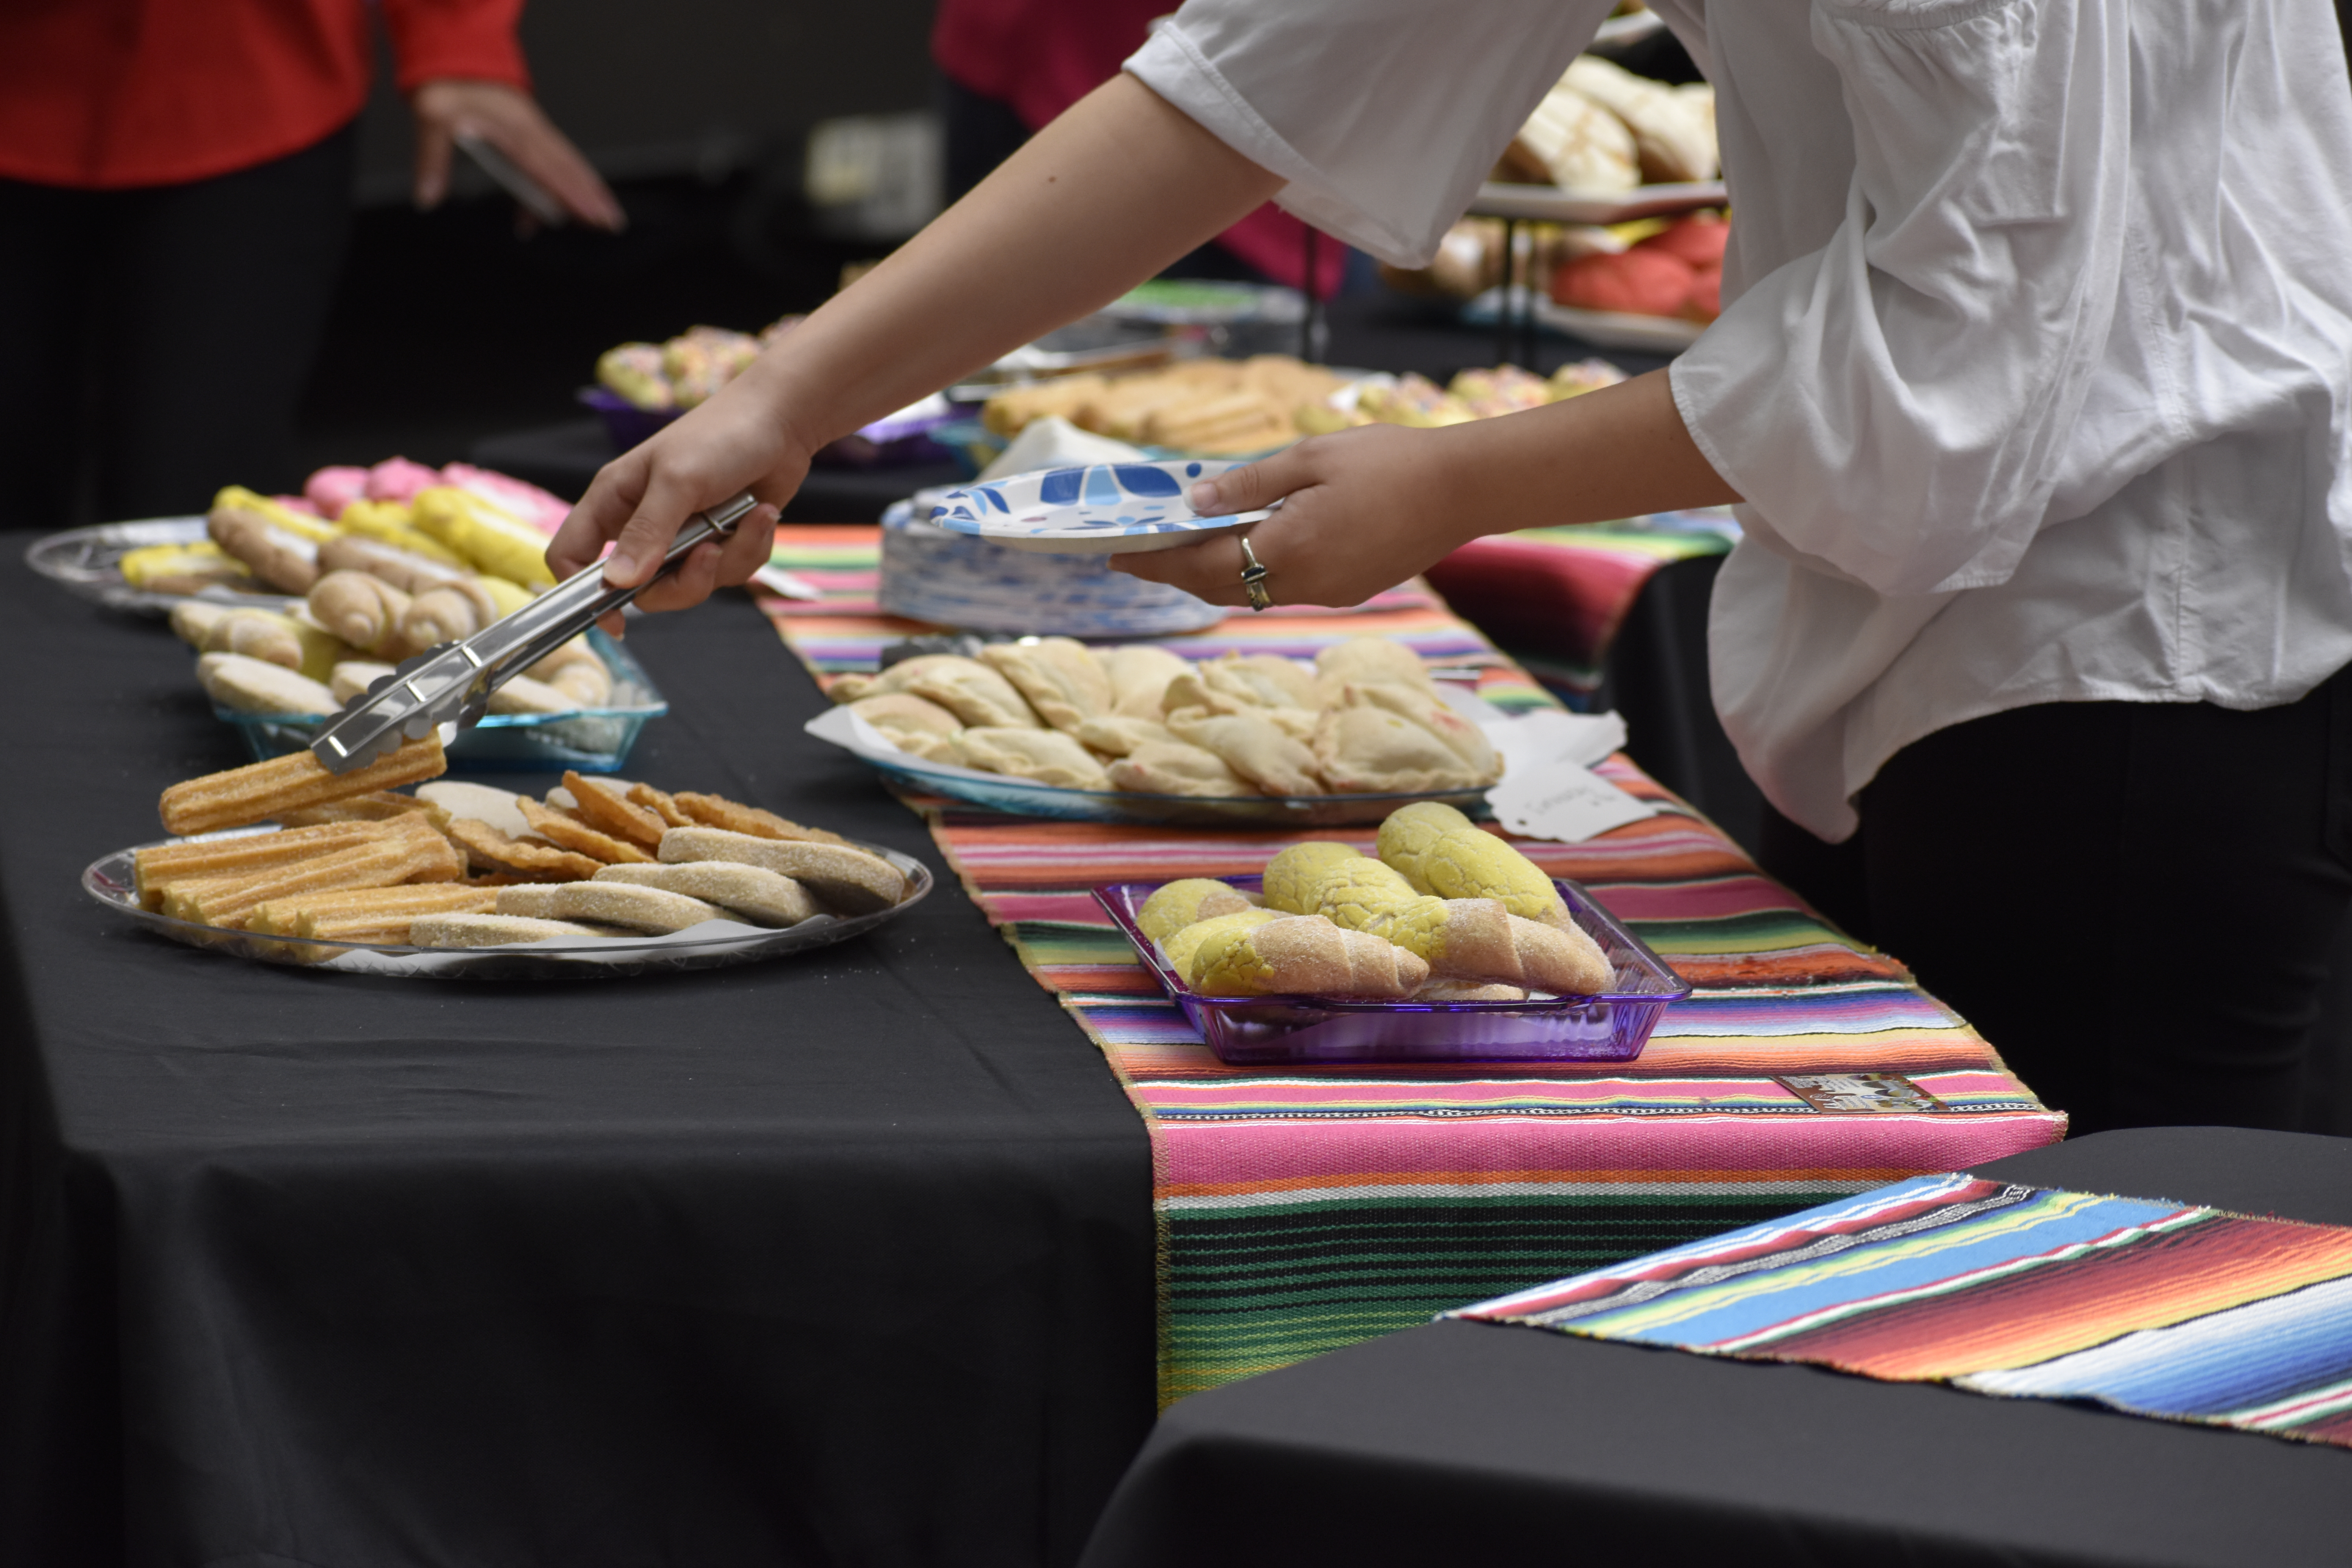 A person using tongs to get a churro from a table of many Hispanic desserts and treats.